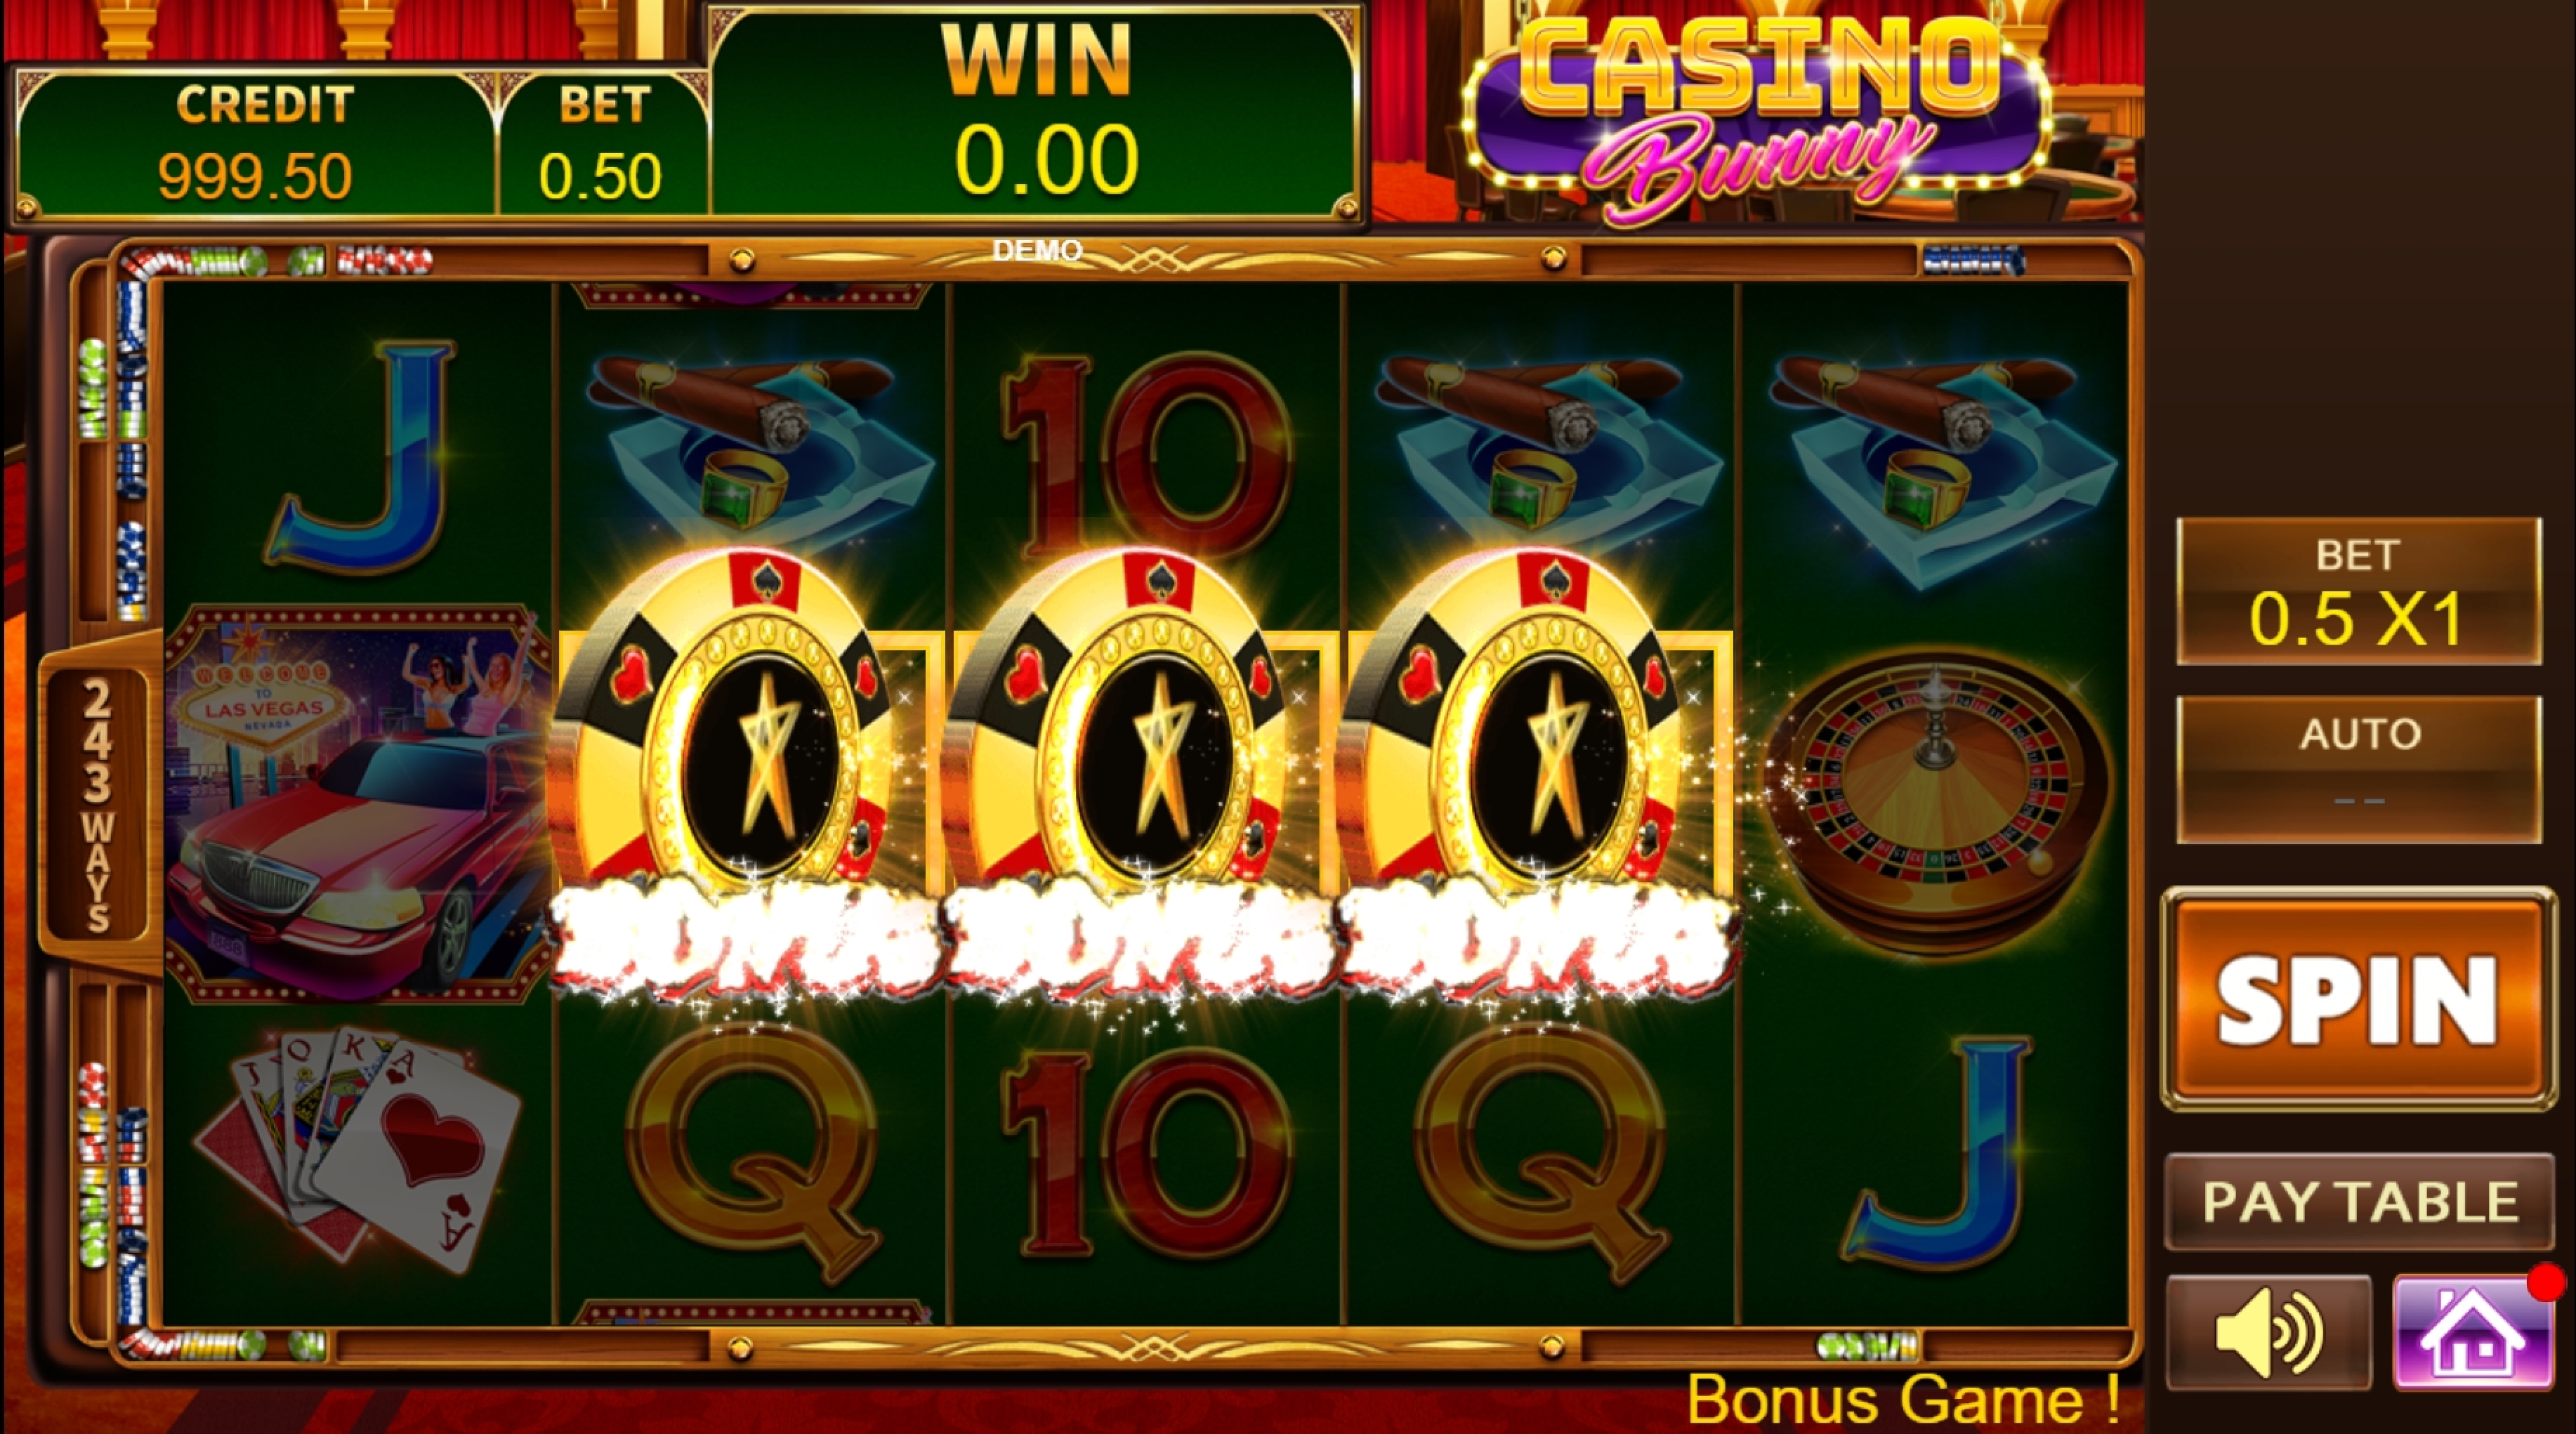 Win Money in Casino Bunny Free Slot Game by PlayStar